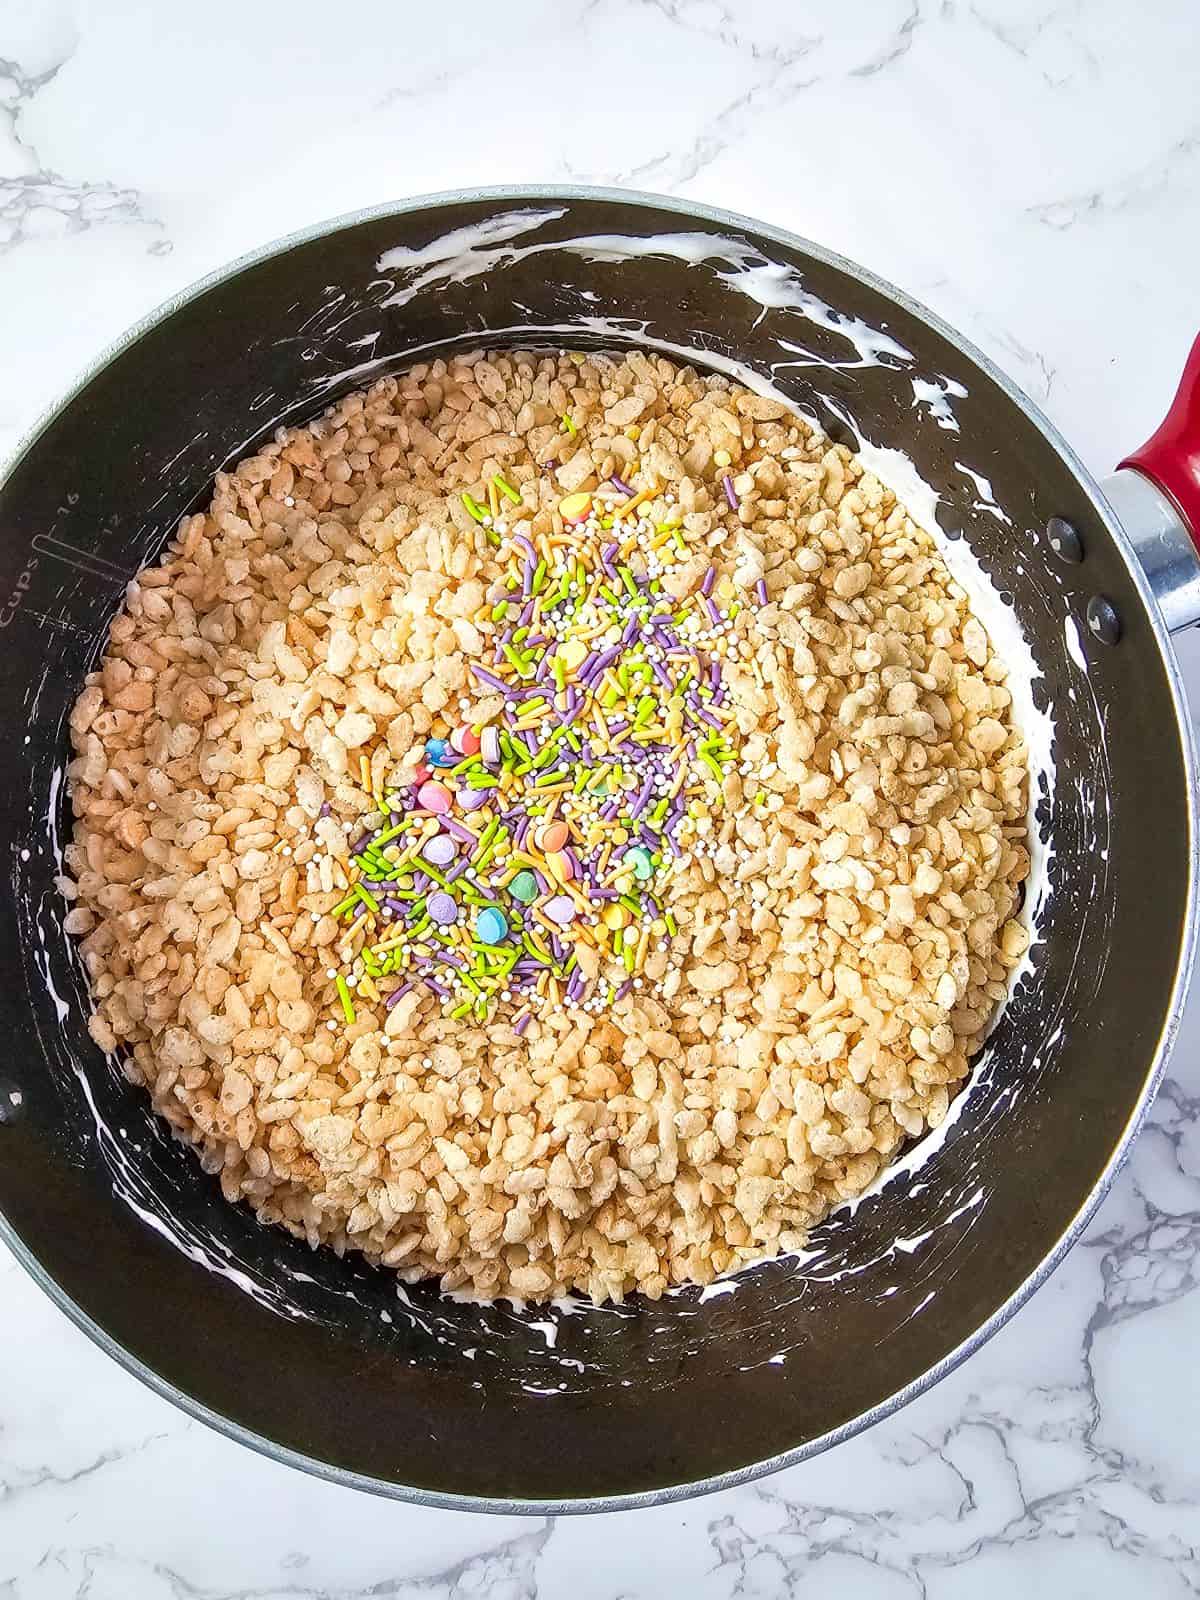 A pan with rice cereal treat mixture with colorful sprinkles on top.